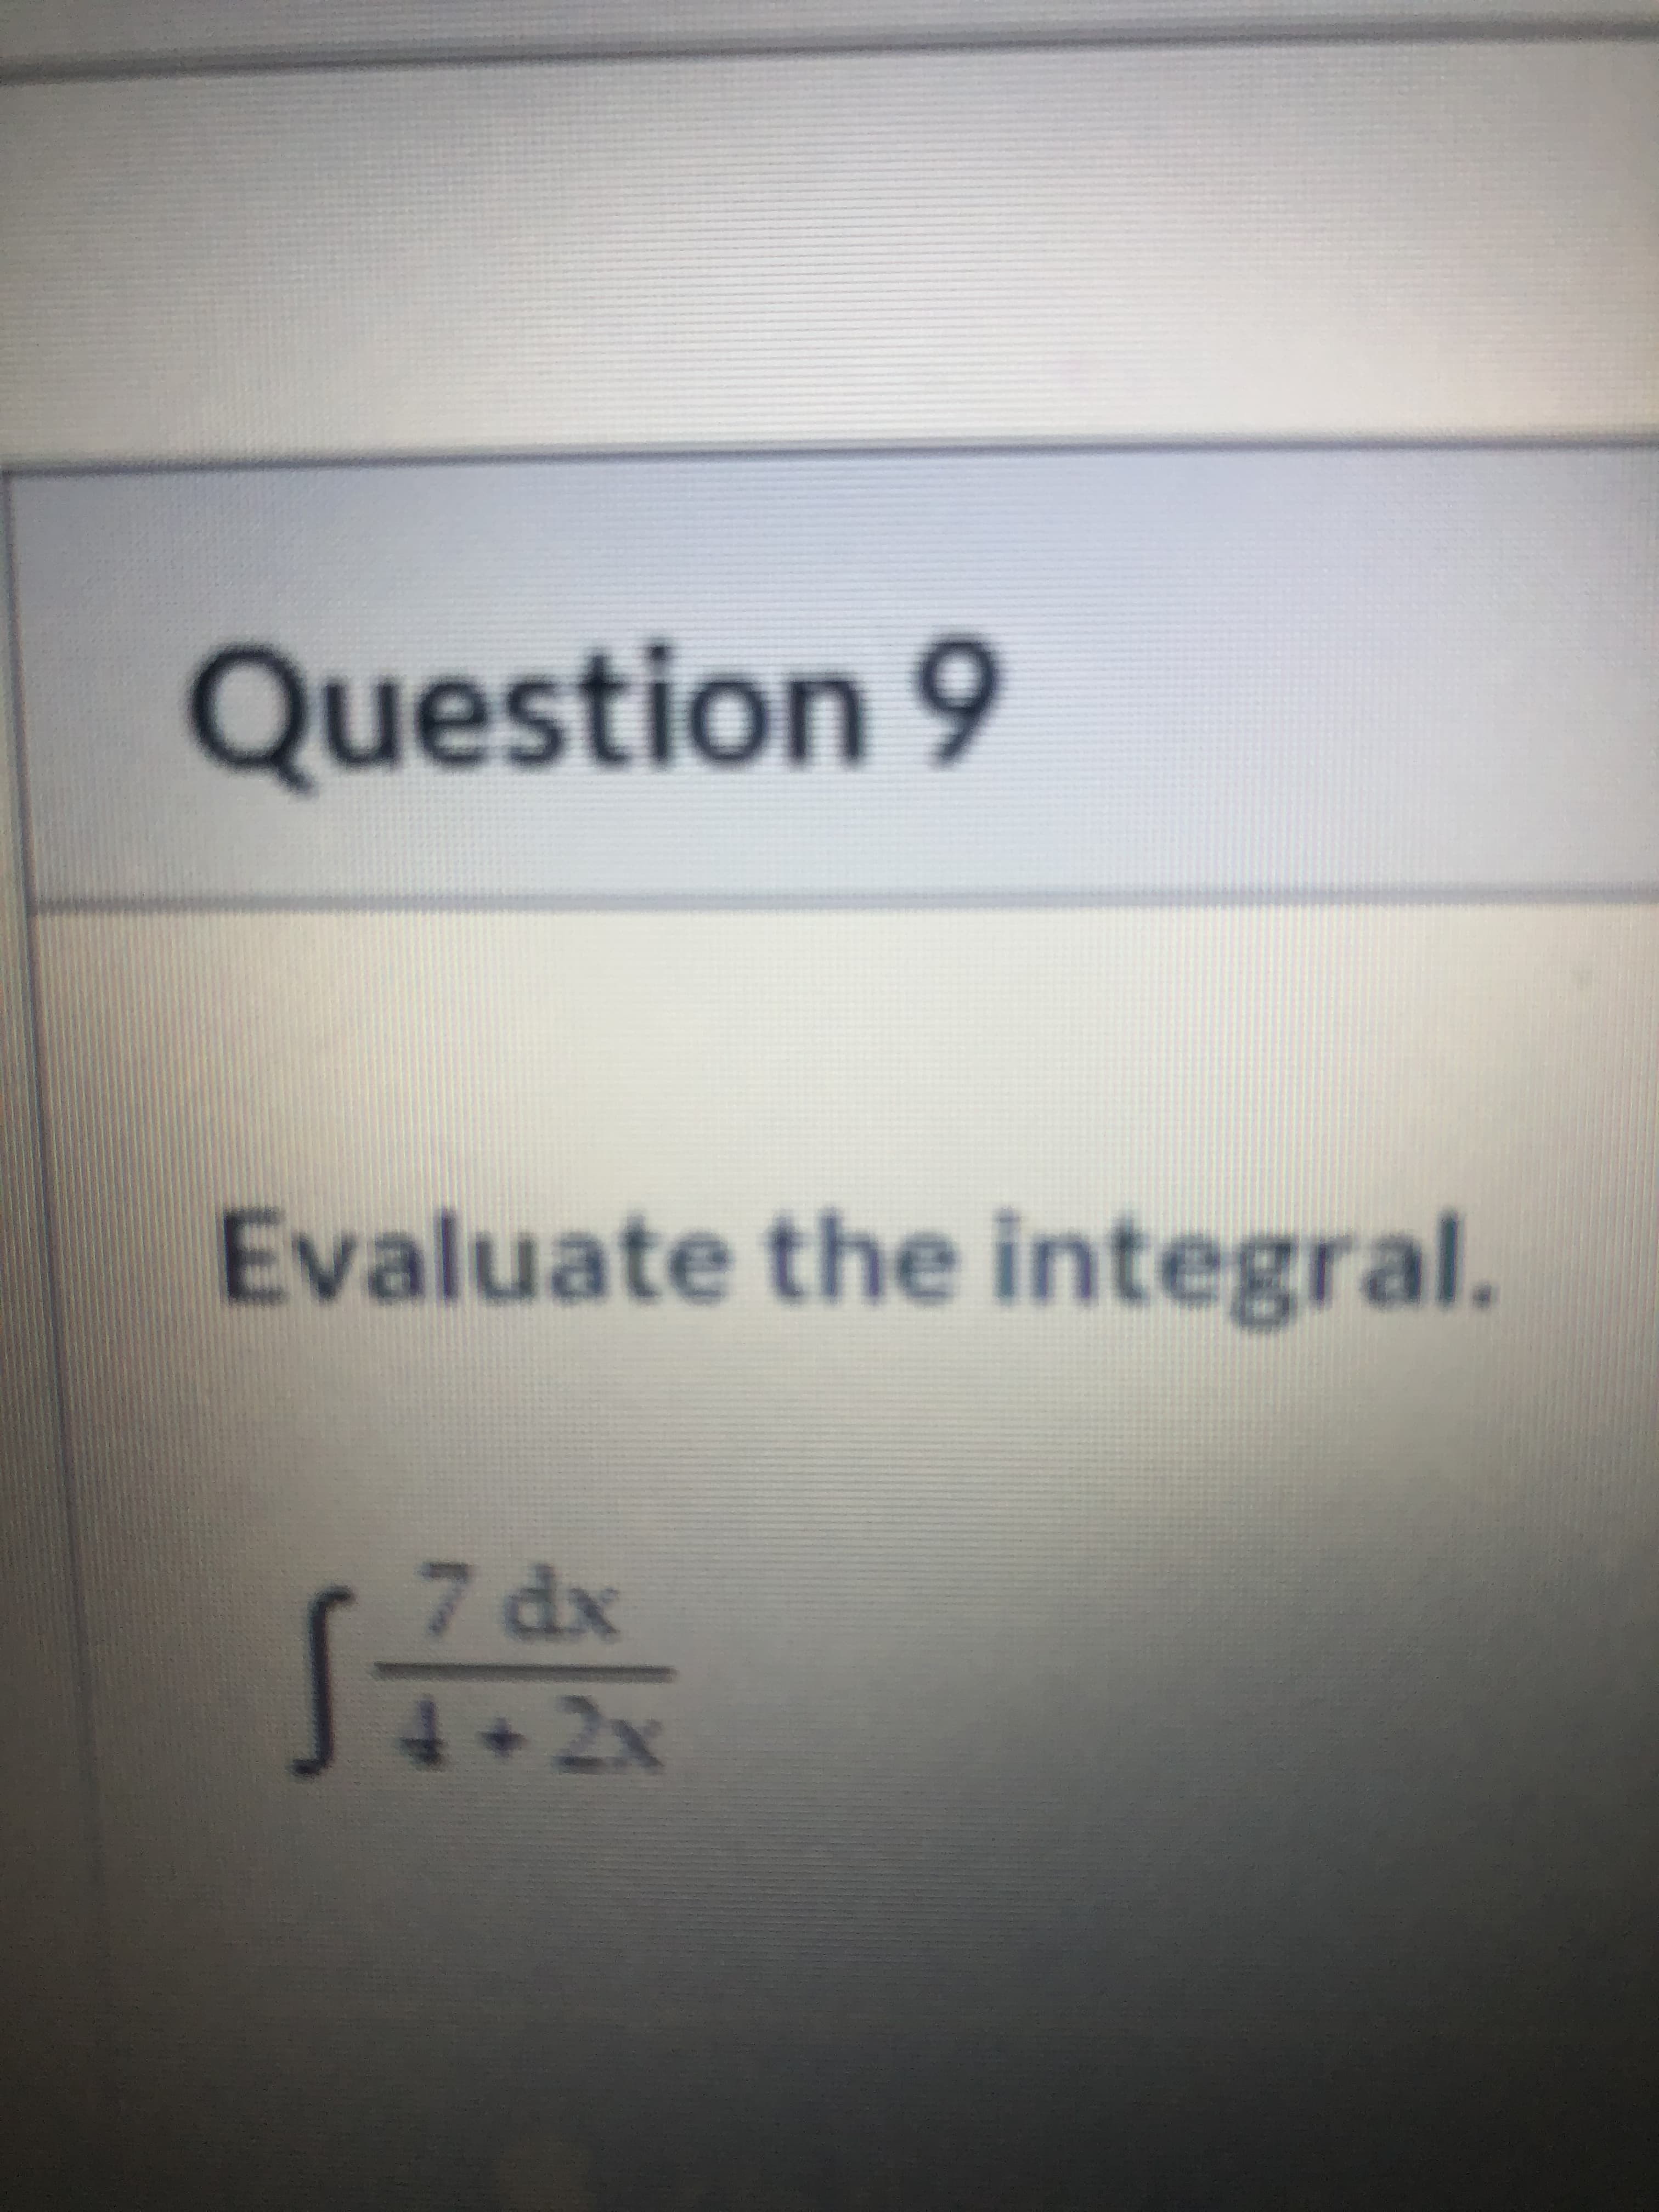 Evaluate the integral.
